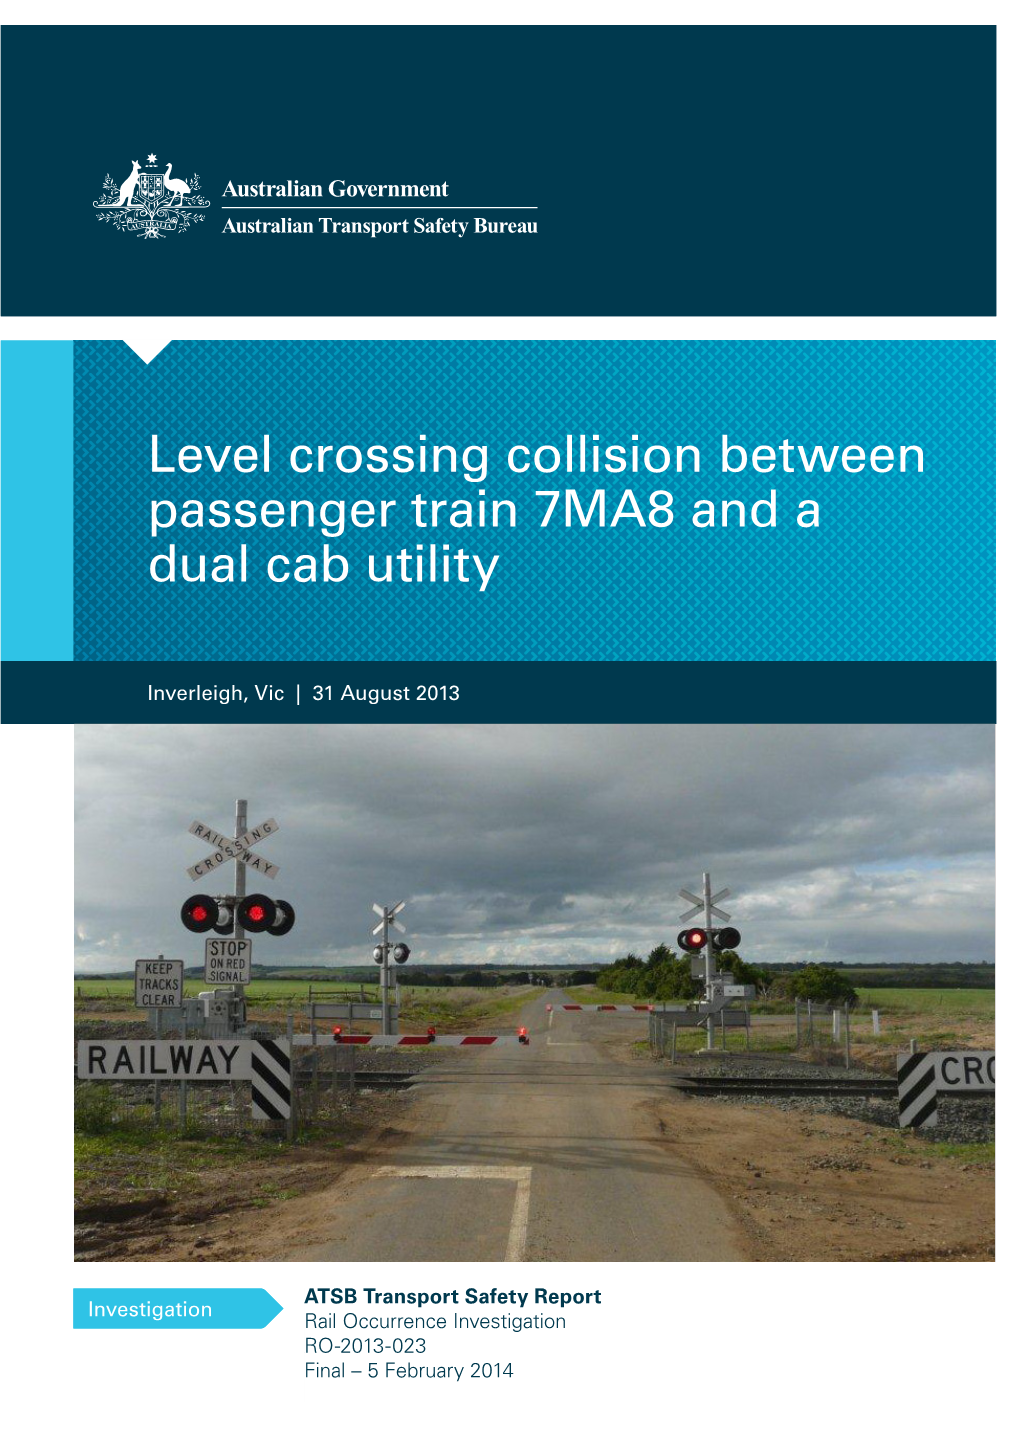 Level Crossing Collision Between Passenger Train 7MA8 and a Dual Cab Utility, Inverleigh, Victoria, 31 August 2013